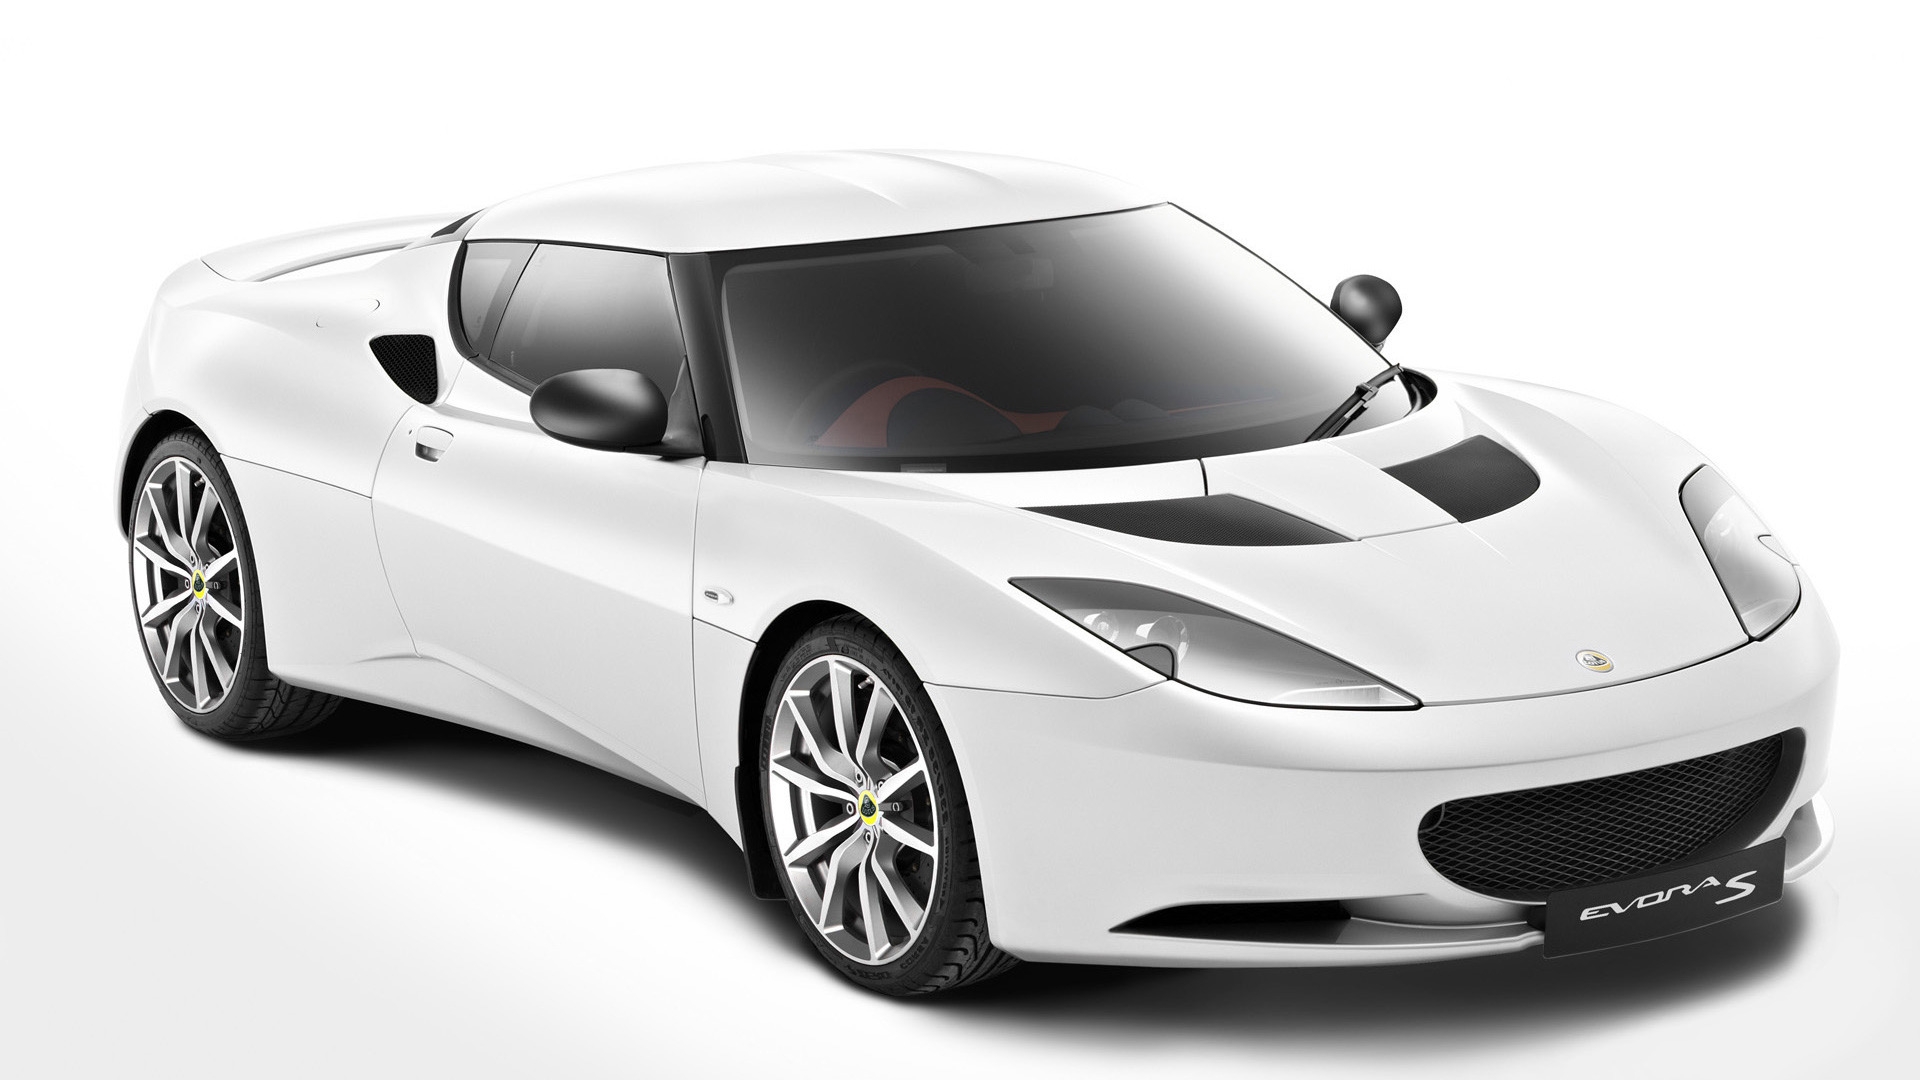 Lotus Evora S 2011 Front Angle for 1920 x 1080 HDTV 1080p resolution